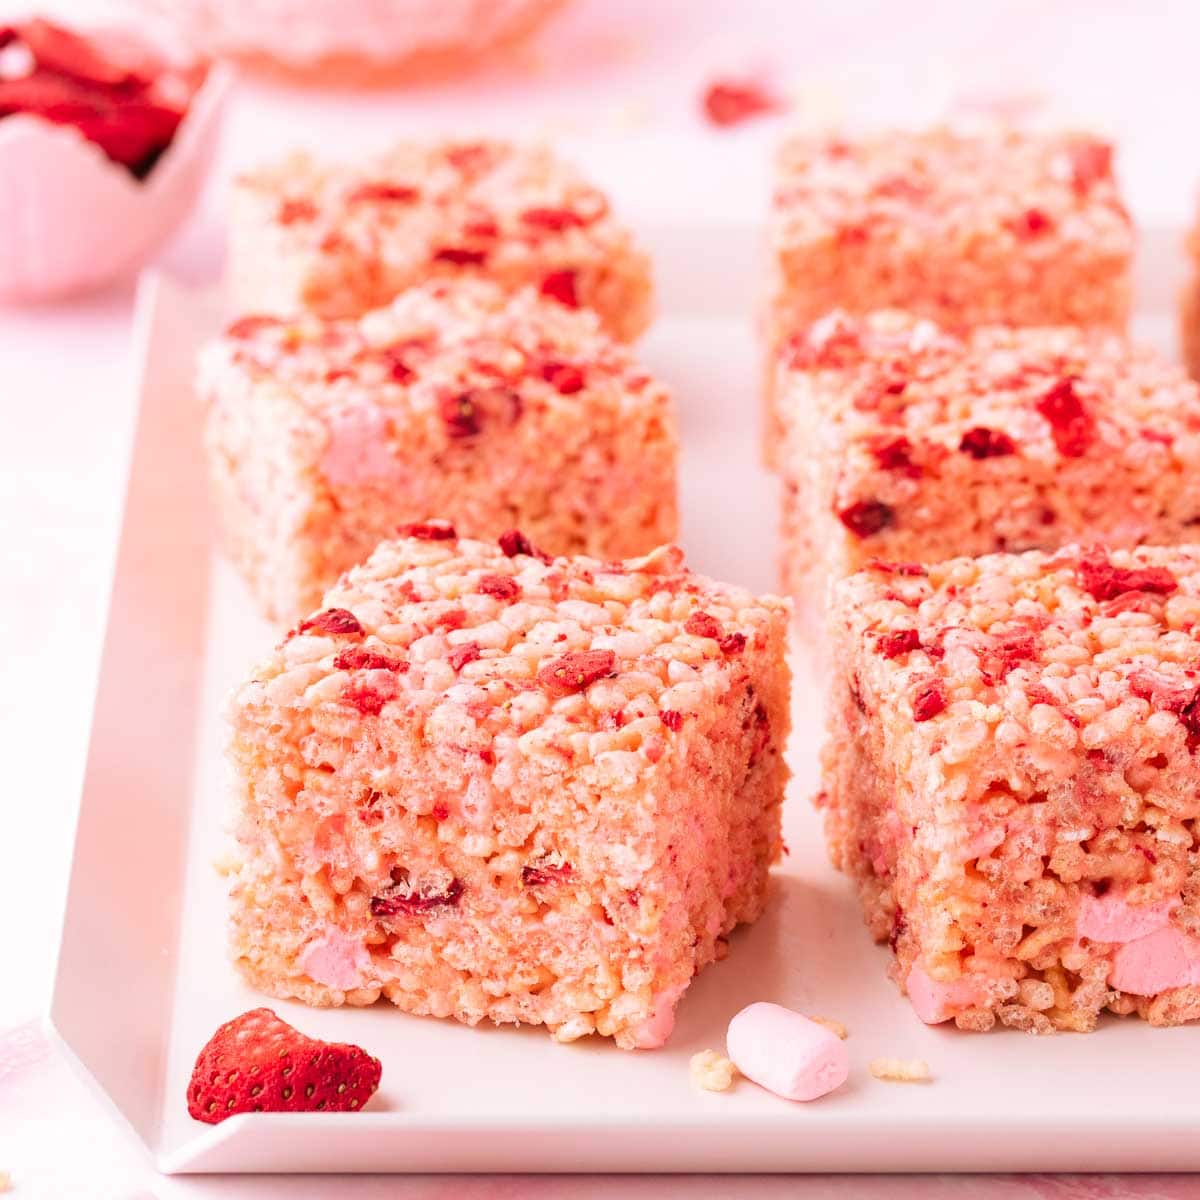 Six square strawberry rice krispie treats on a white tray with scattered pieces of freeze-dried strawberry.